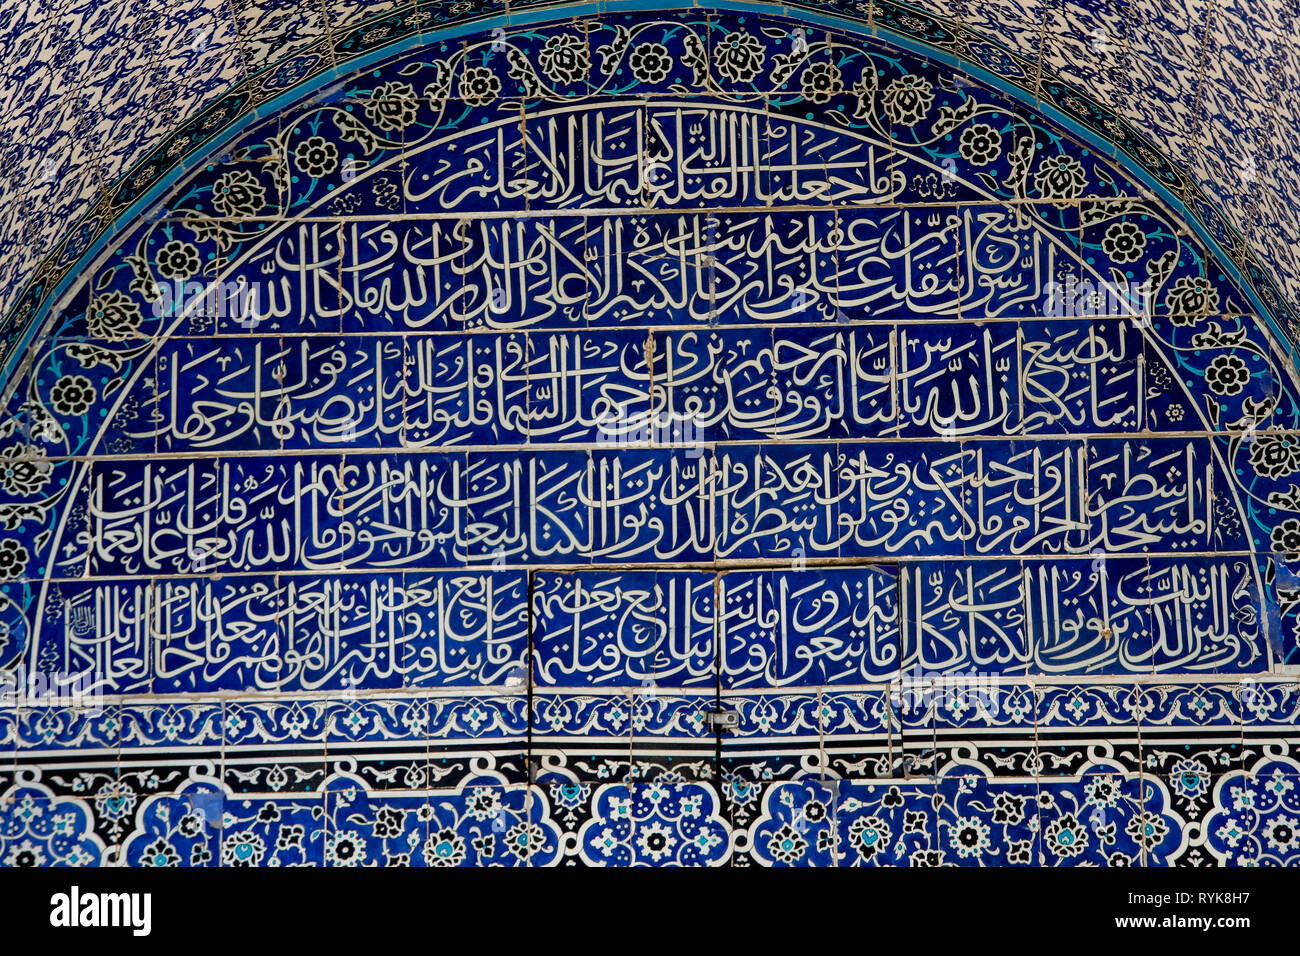 Detail of the Dome of the Rock, East Jerusalem, Israel. Stock Photo